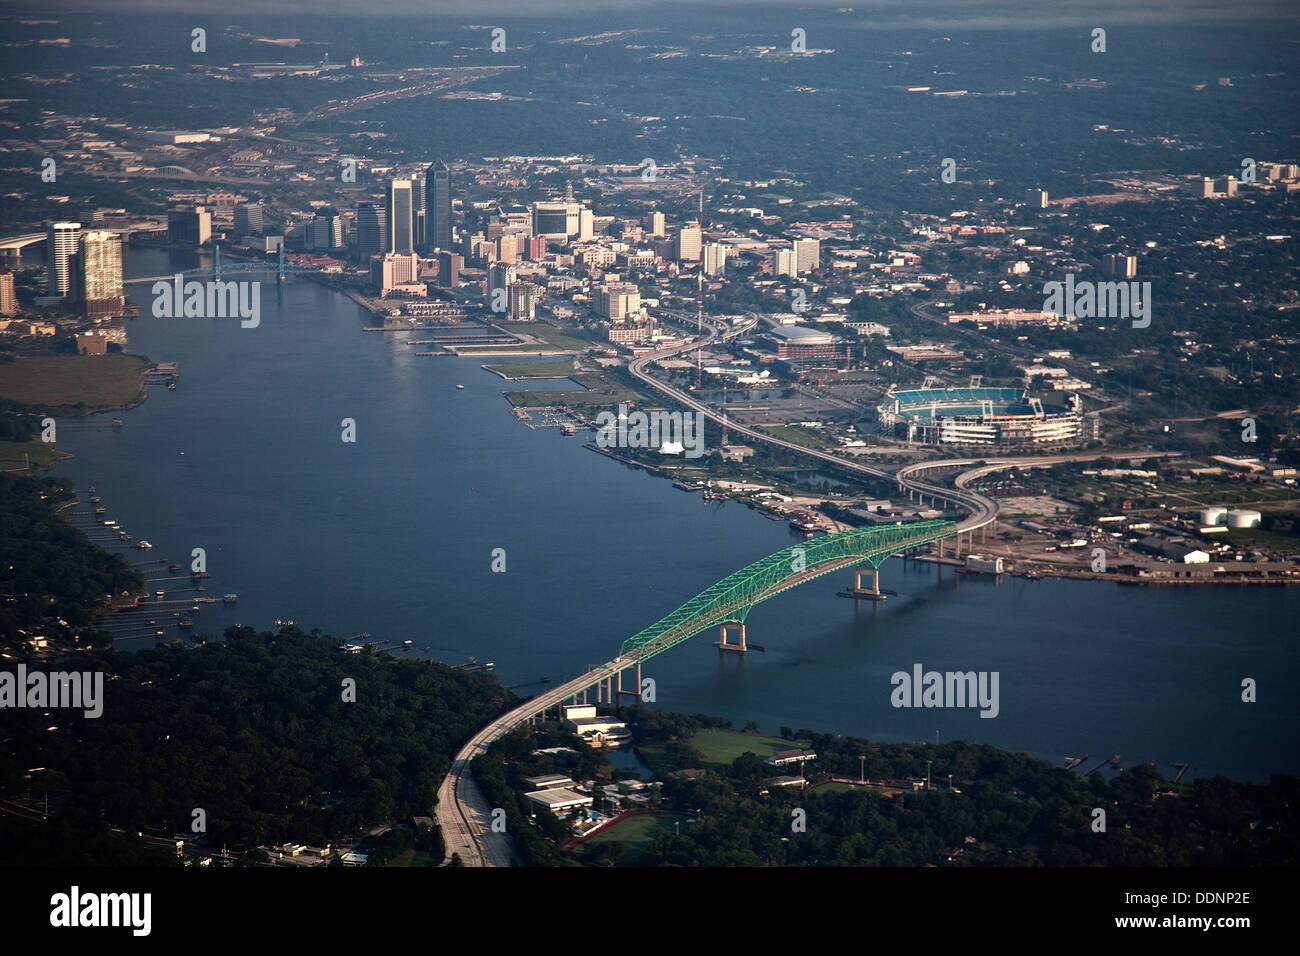 Aerial view of Jacksonville, FL - July, 2011 Stock Photo